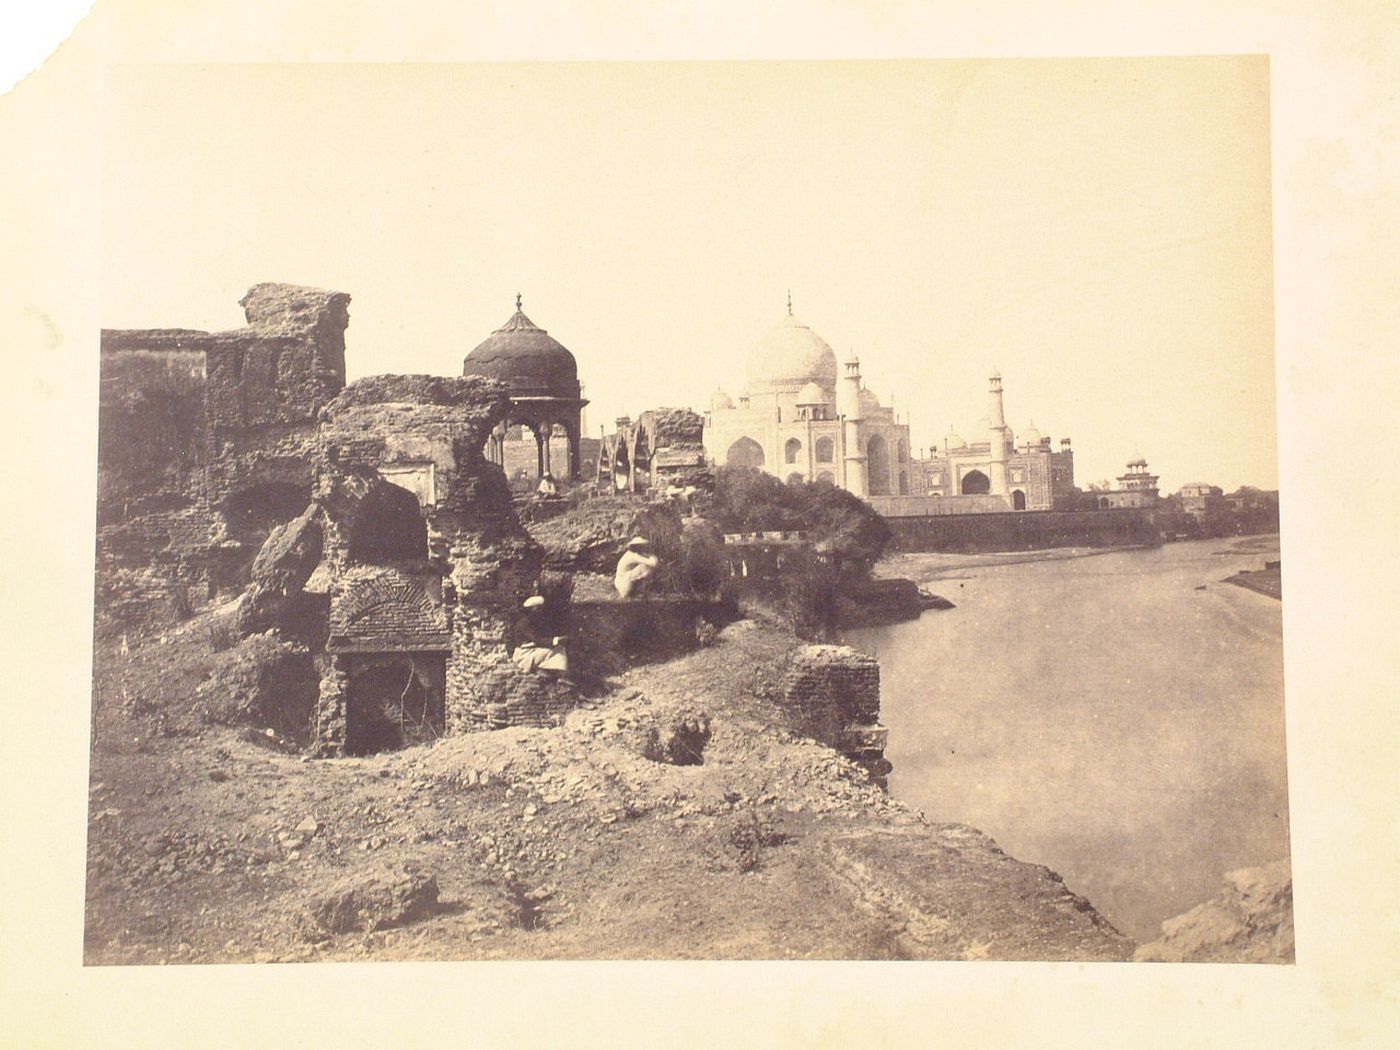 View of the Taj Mahal with ruins in the foreground and the Jami Masjid in the background, Agra, India